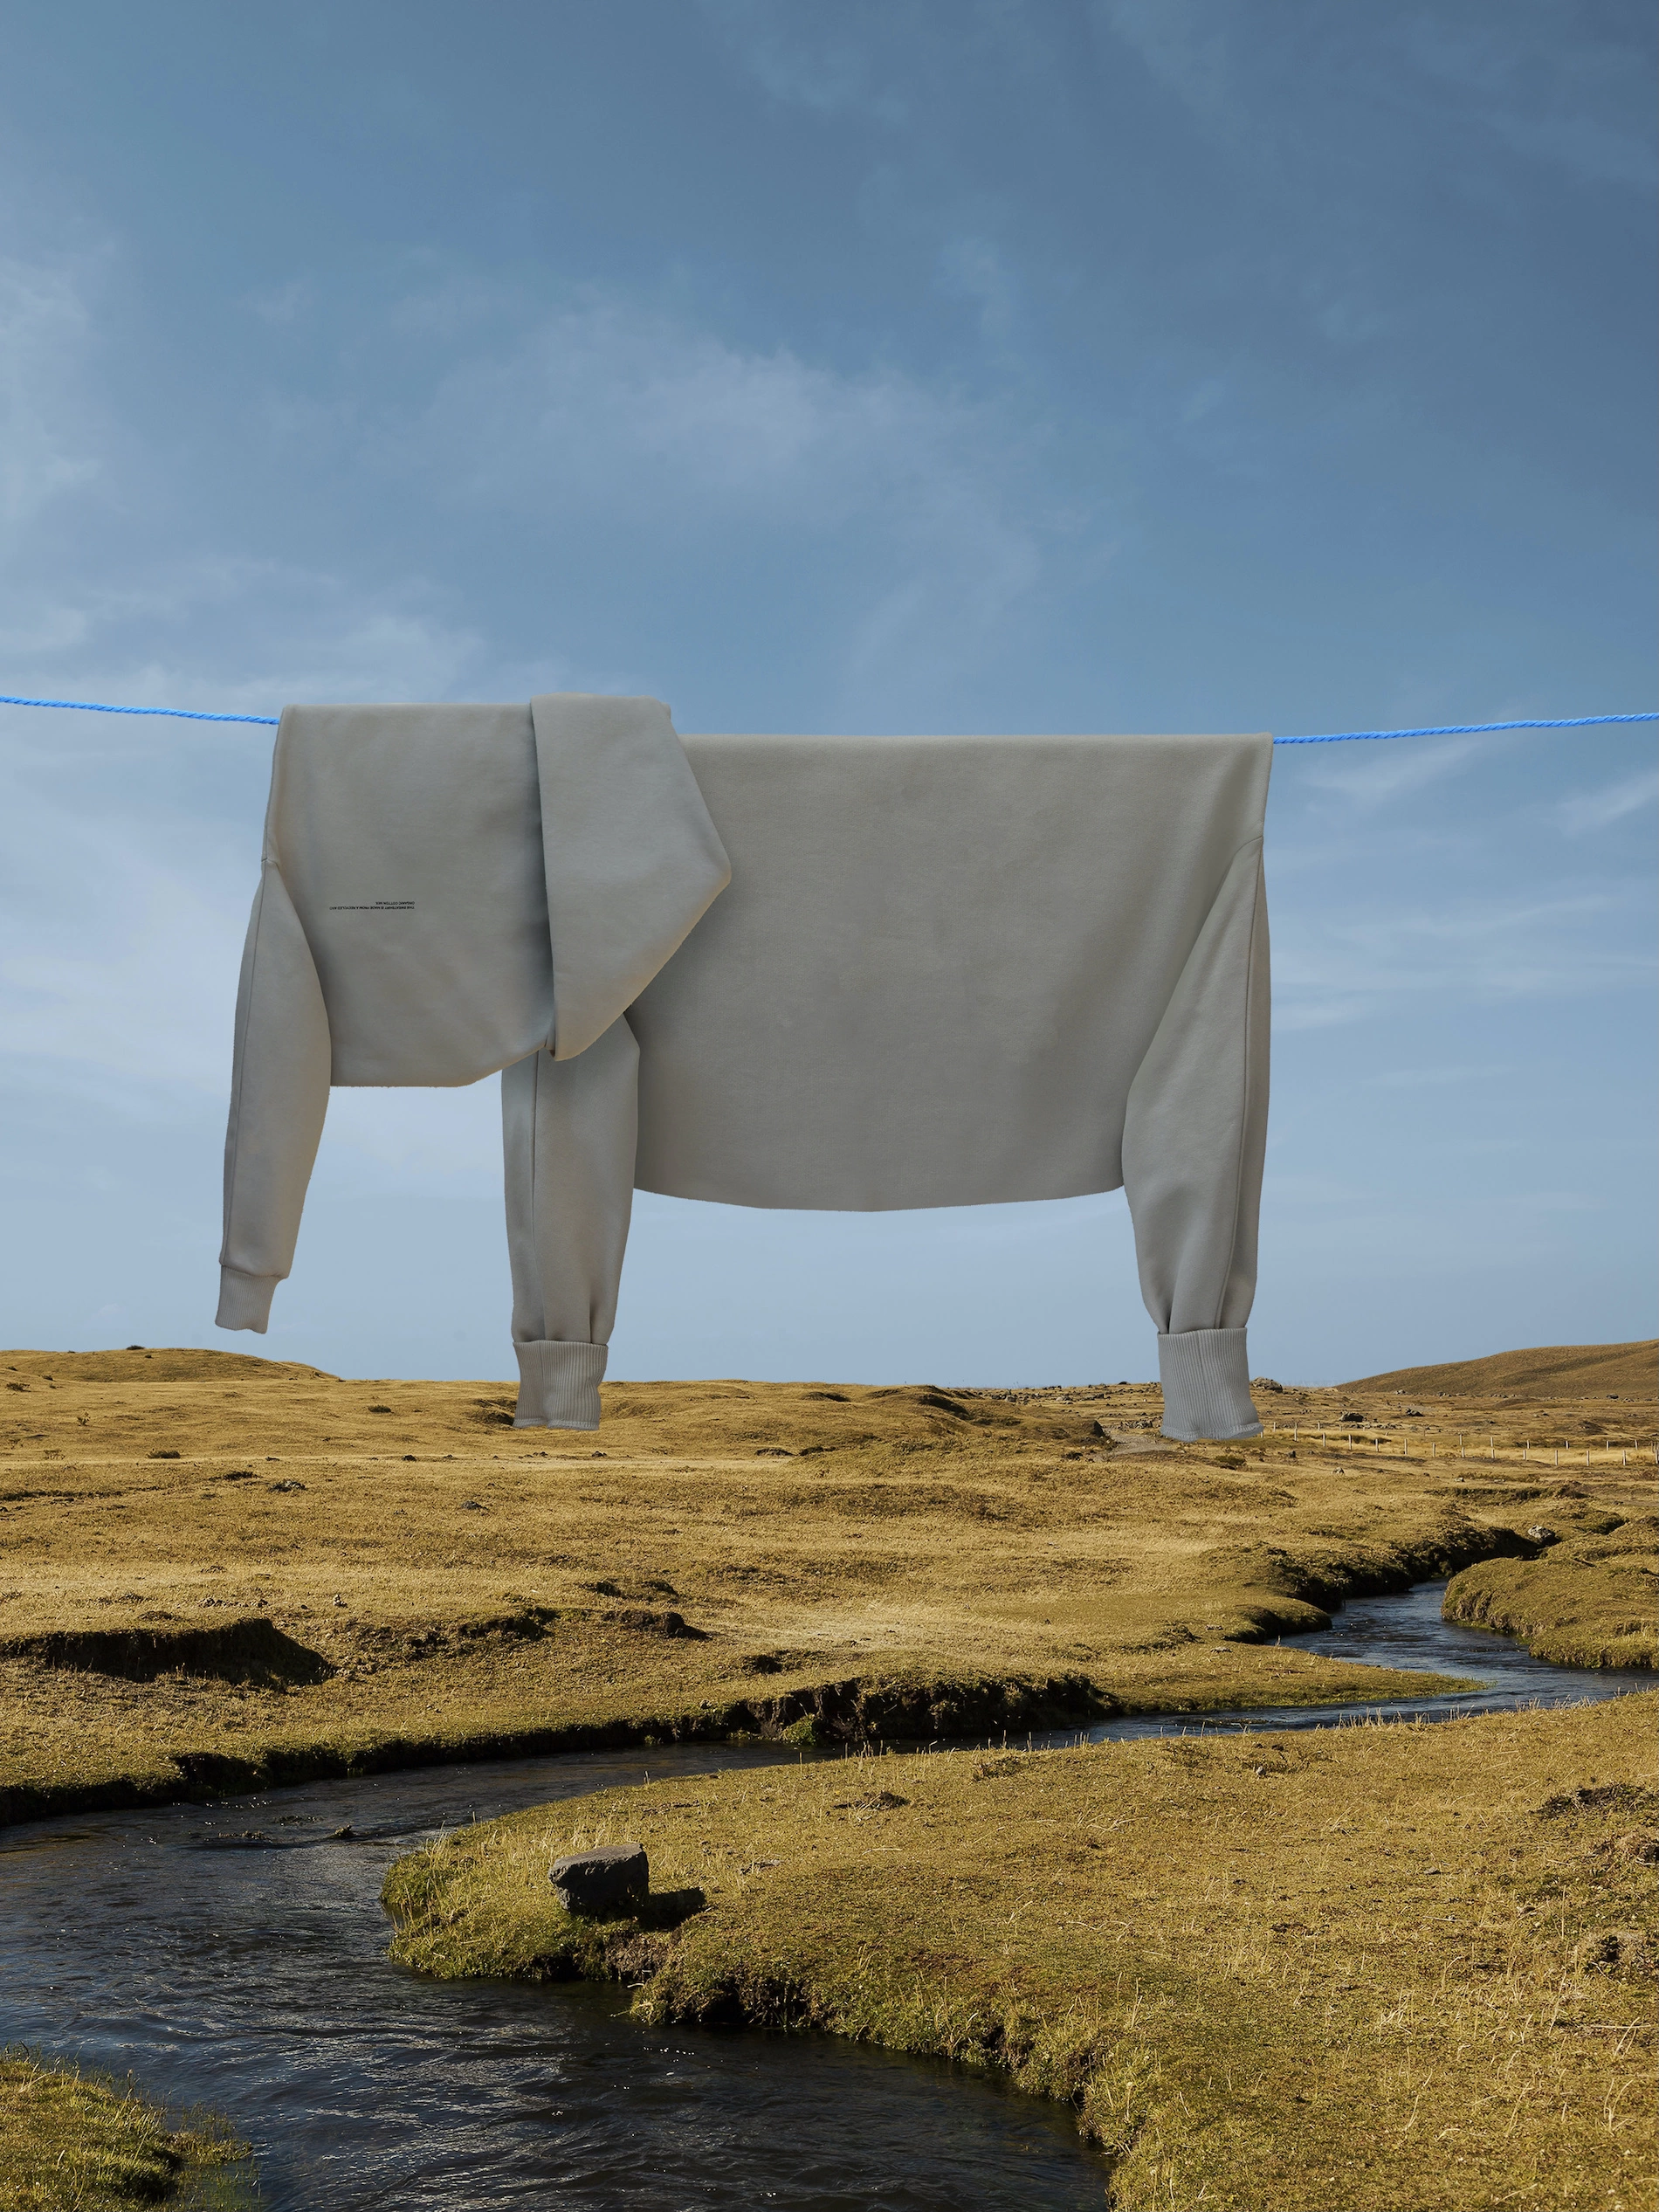 Elephant made out of clothes hung on a line above a river meandering through green fields